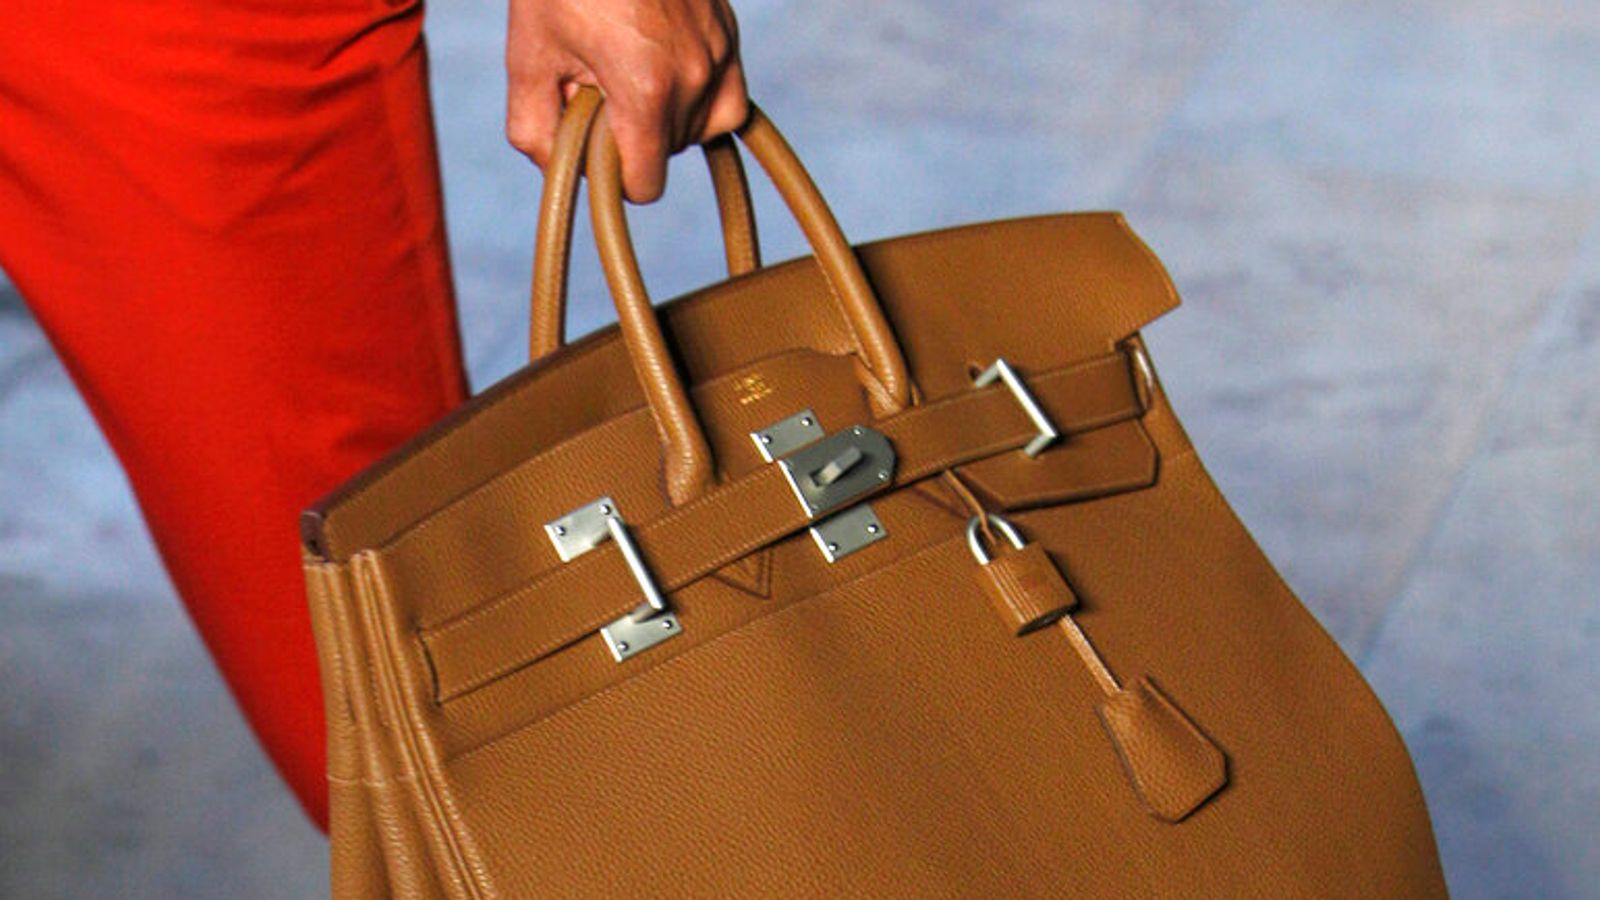 Hermès sued over claims it refused to sell shoppers Birkin bags